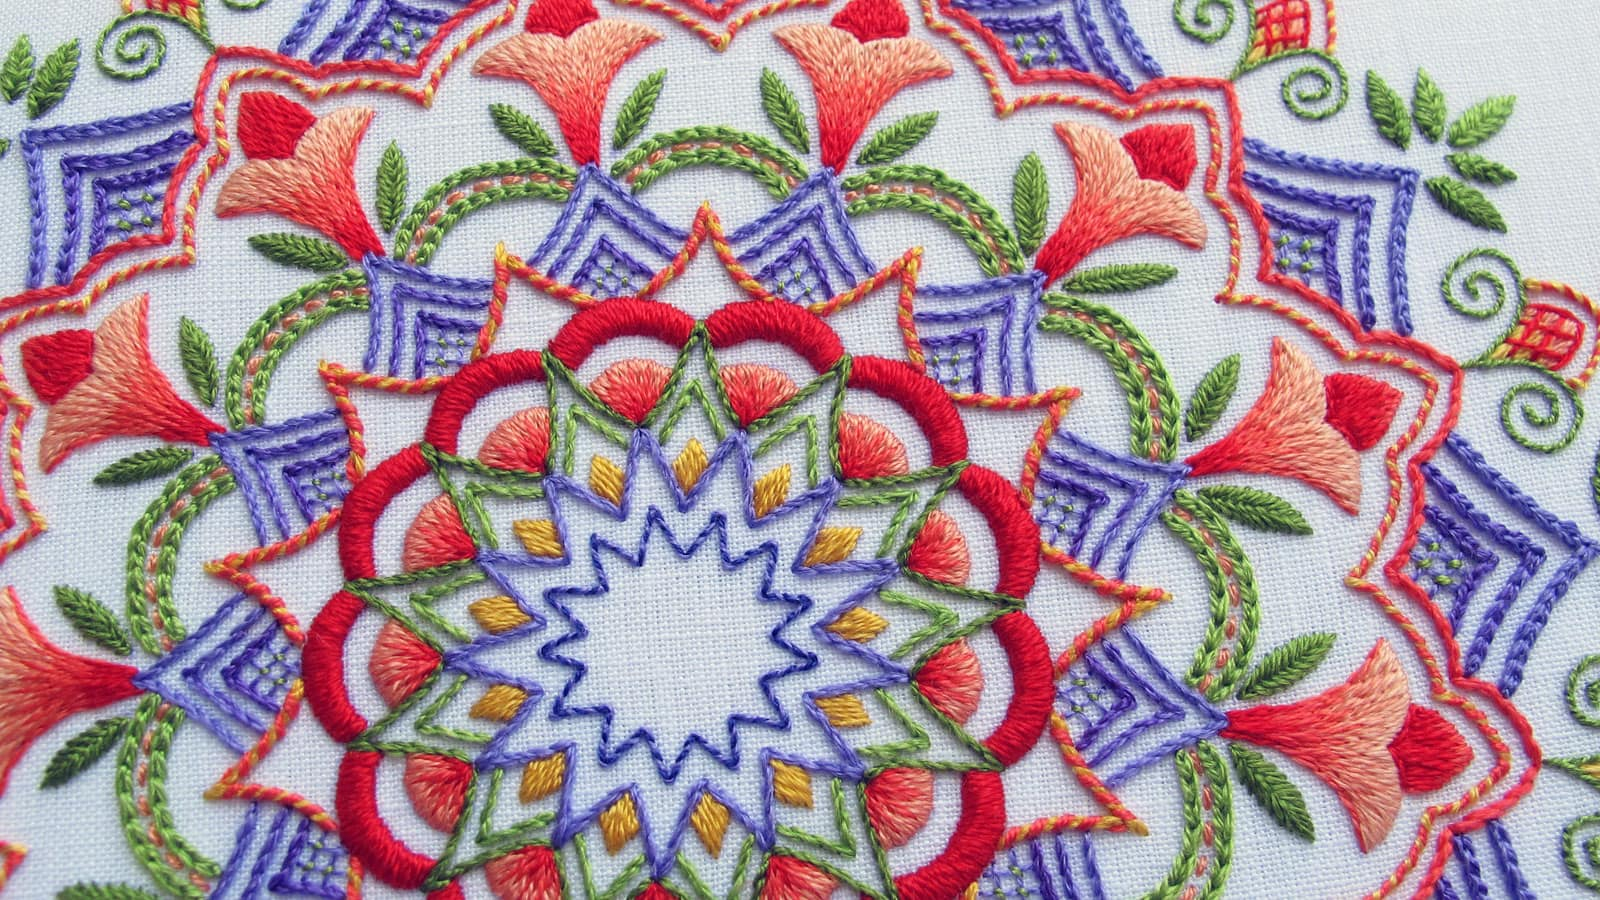 Jacobean Embroidery Patterns Needlenthread Tips Tricks And Great Resources For Hand Embroidery